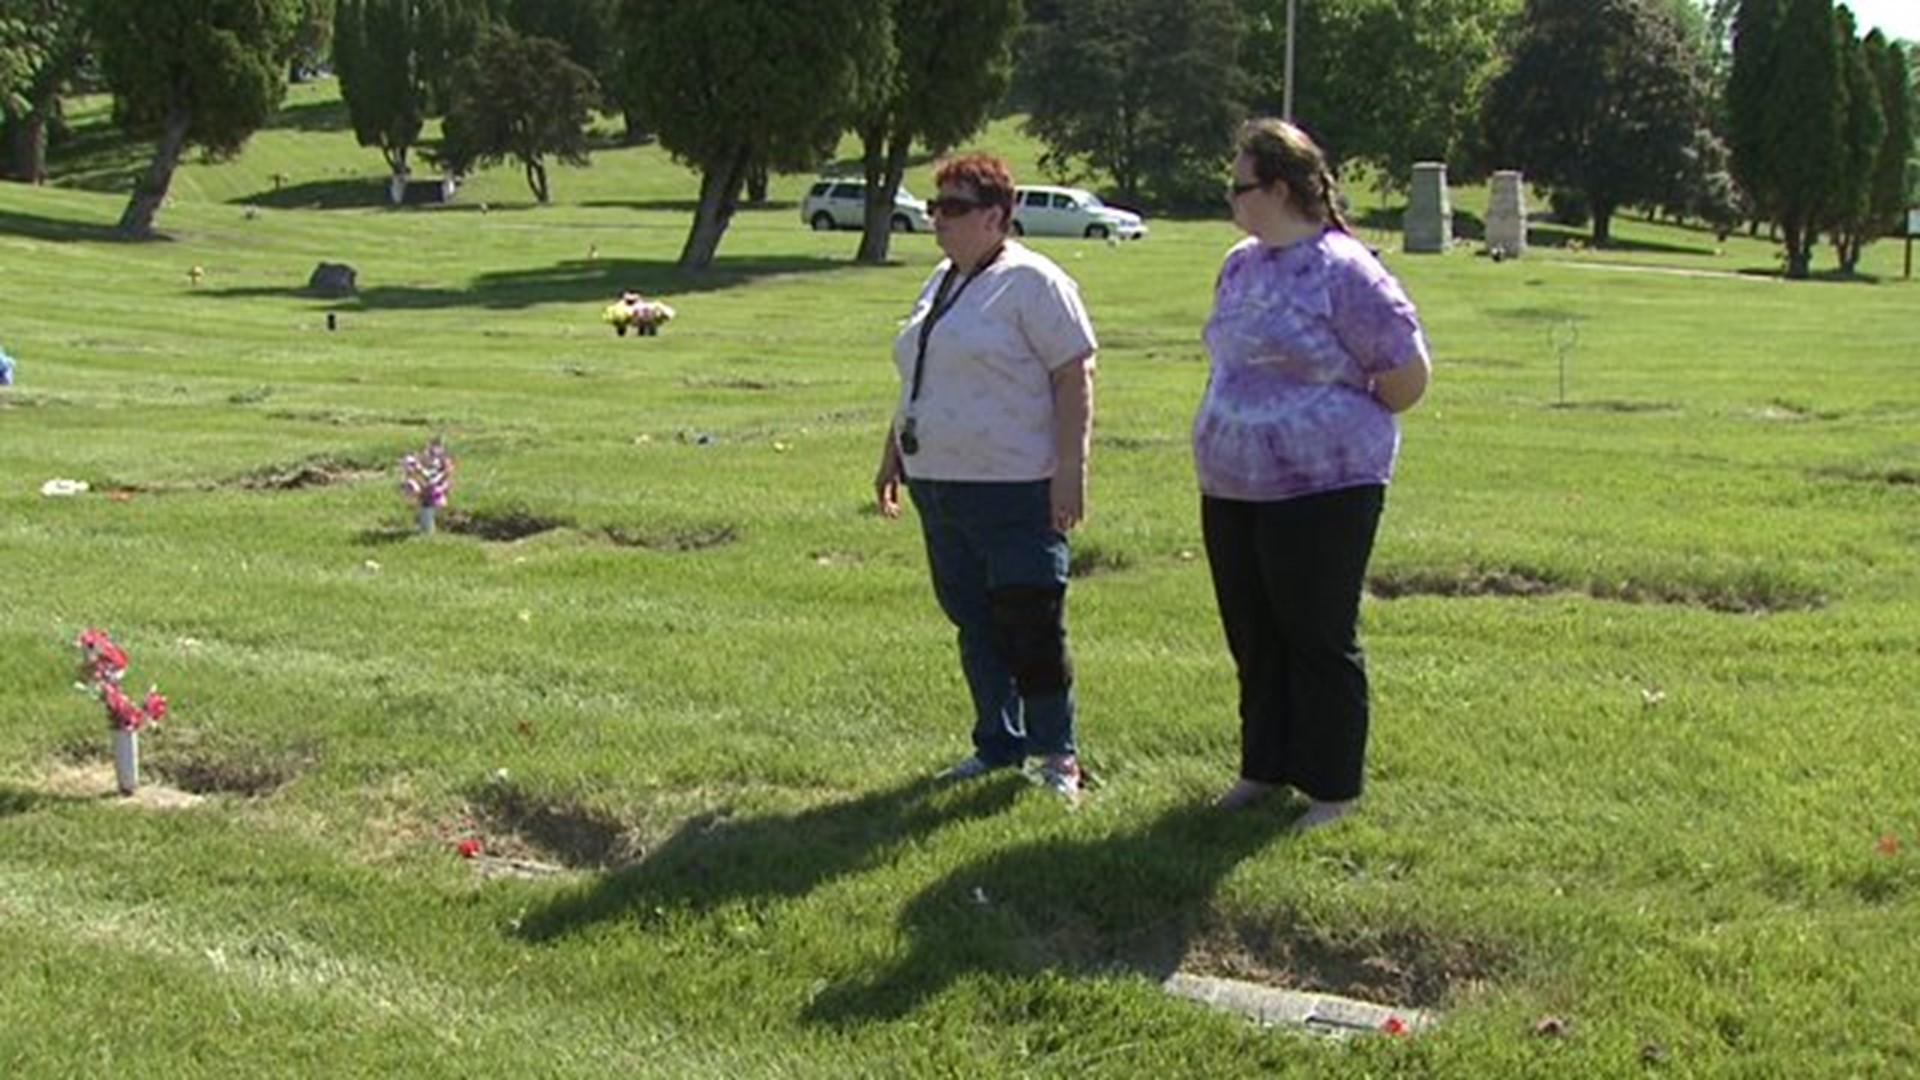 Family wants memorials fixed in cemetery